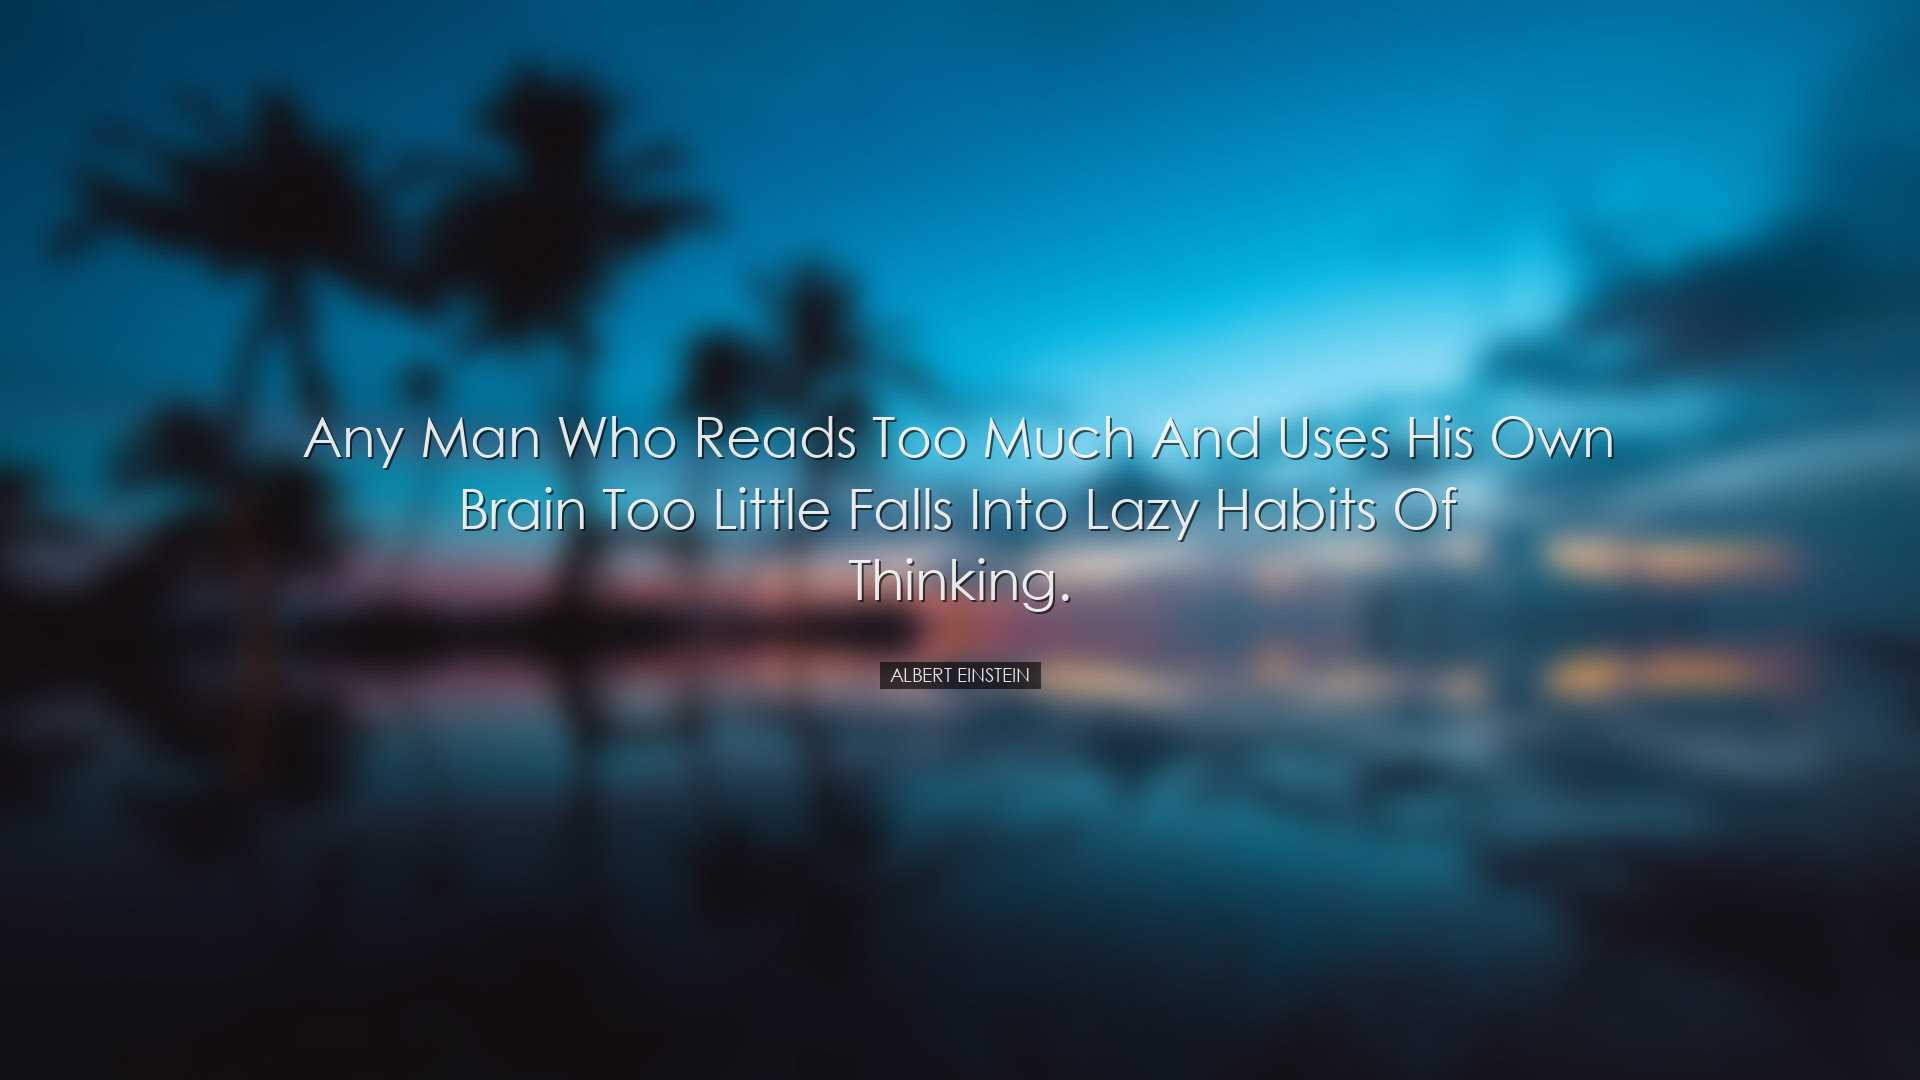 Any man who reads too much and uses his own brain too little falls